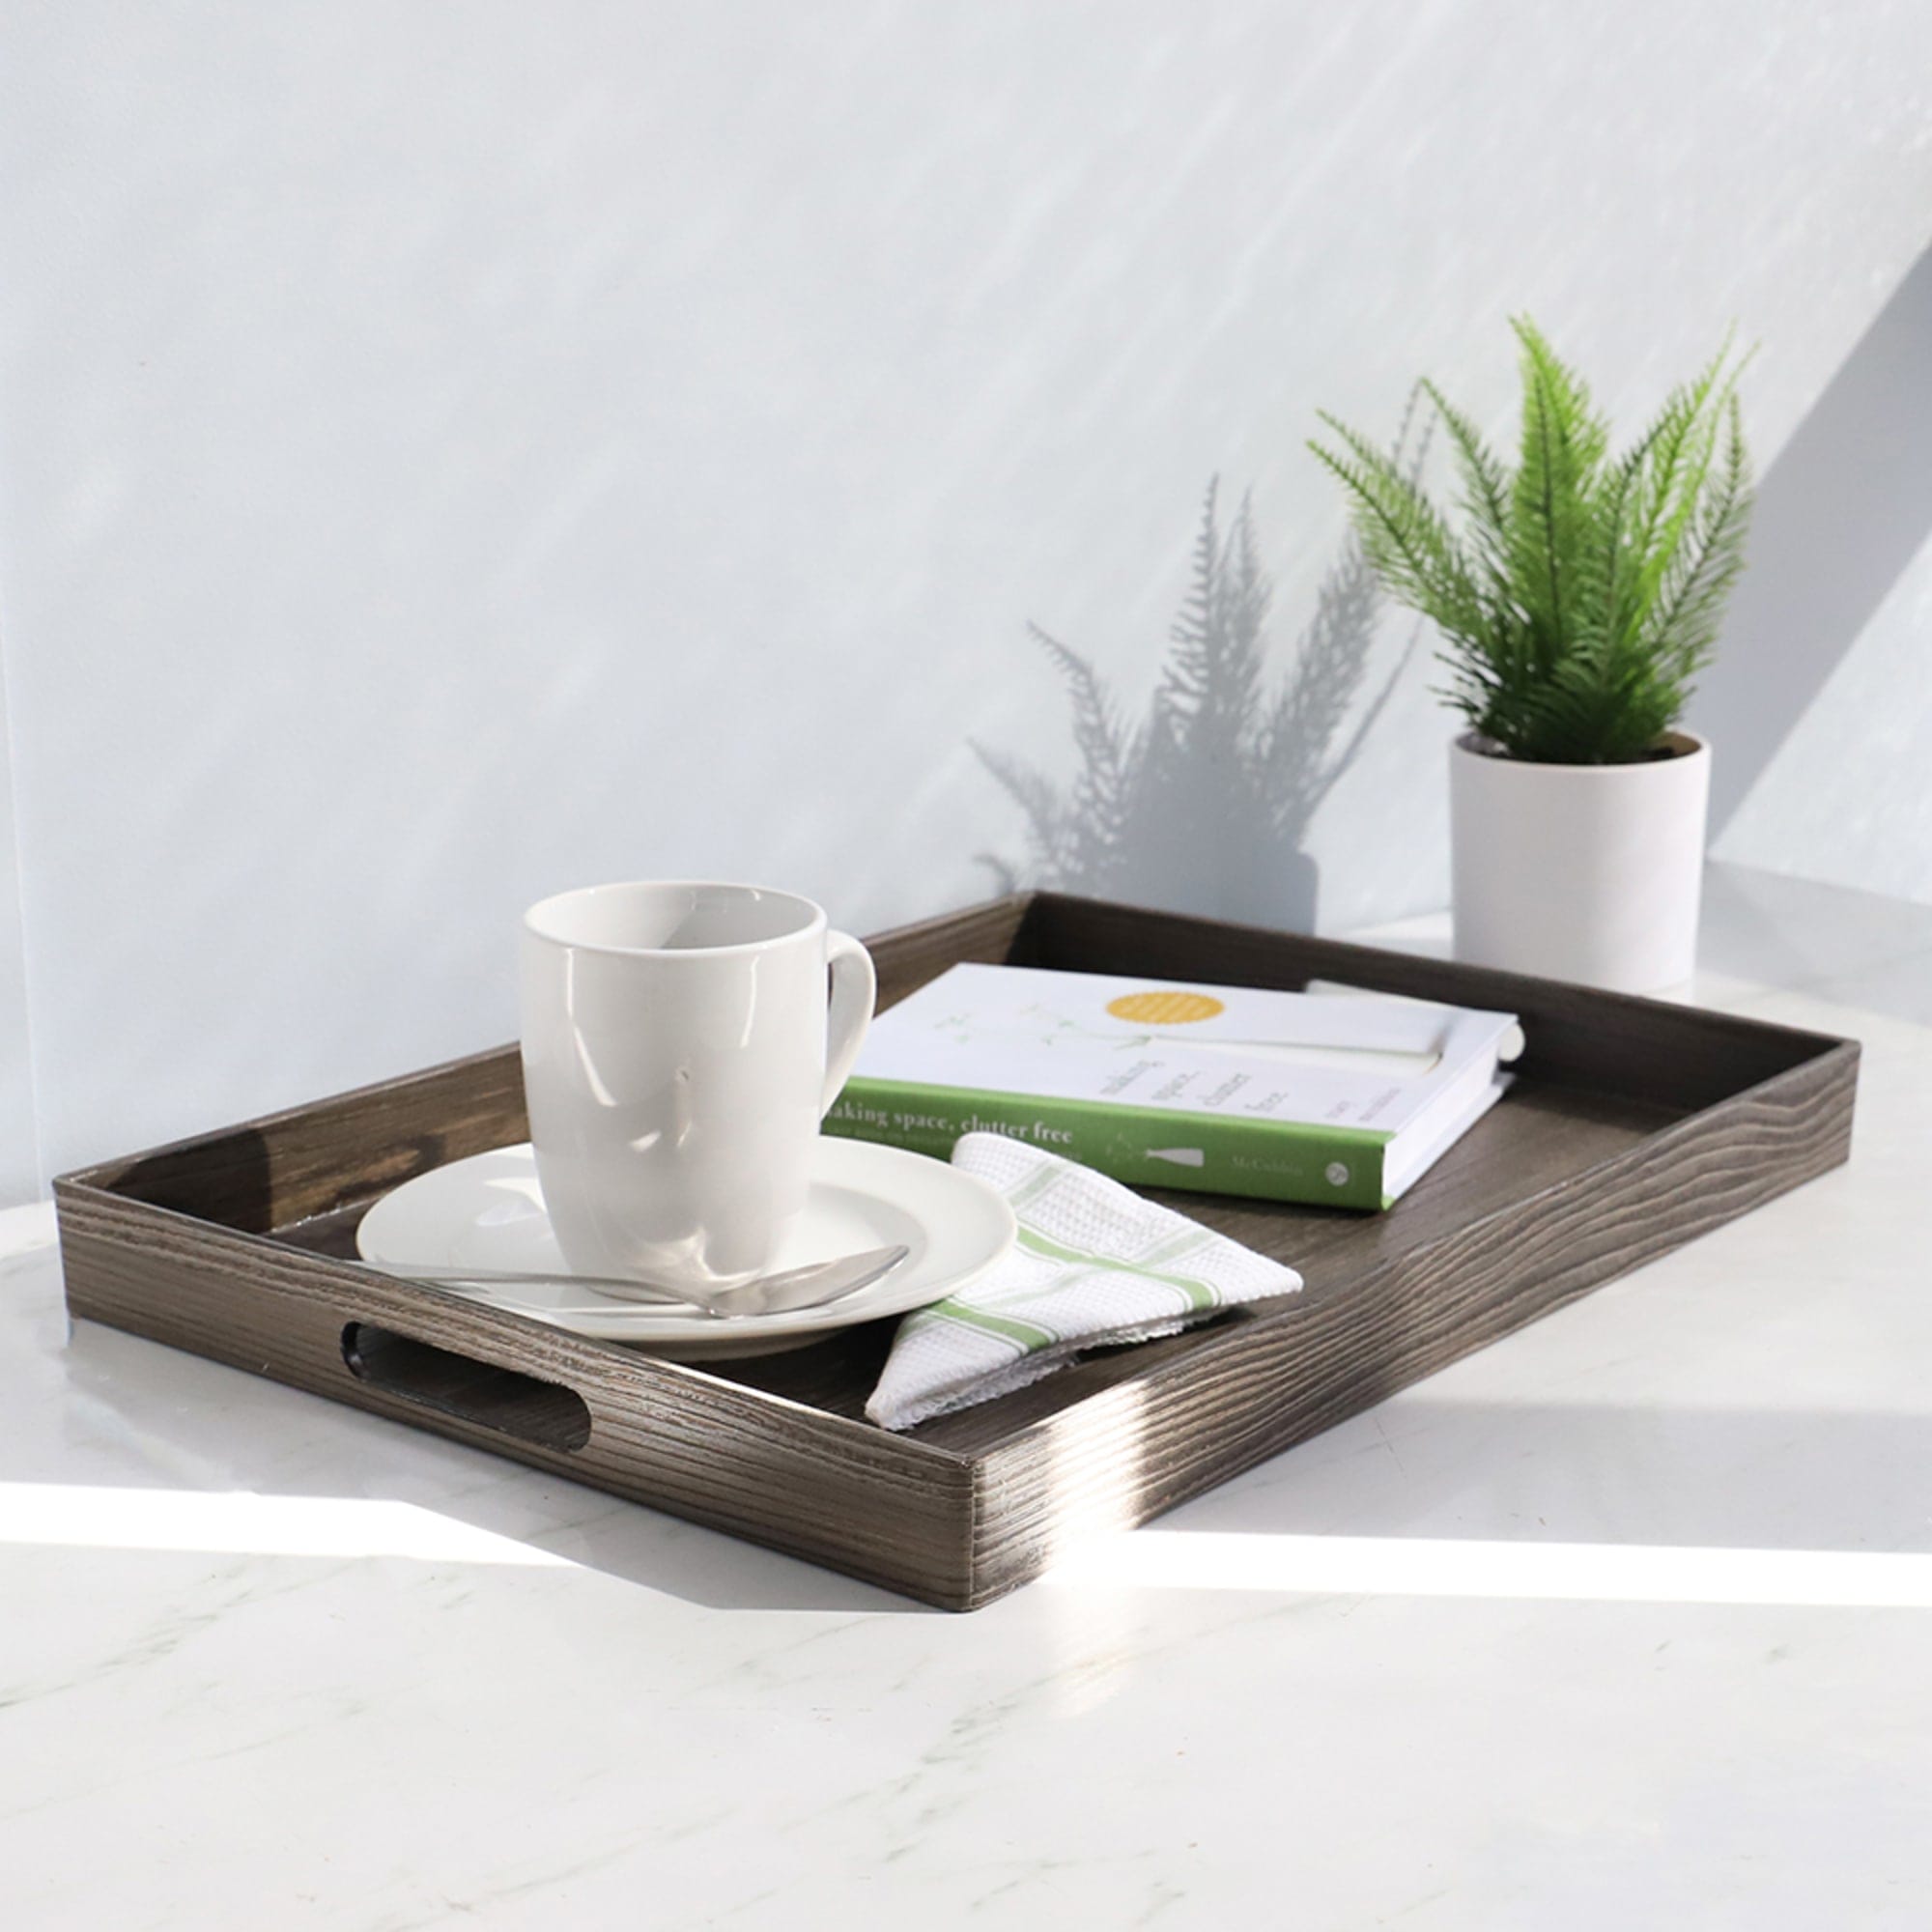 Home Basics Wood-Like Serving Tray, Ash
 $12.00 EACH, CASE PACK OF 6